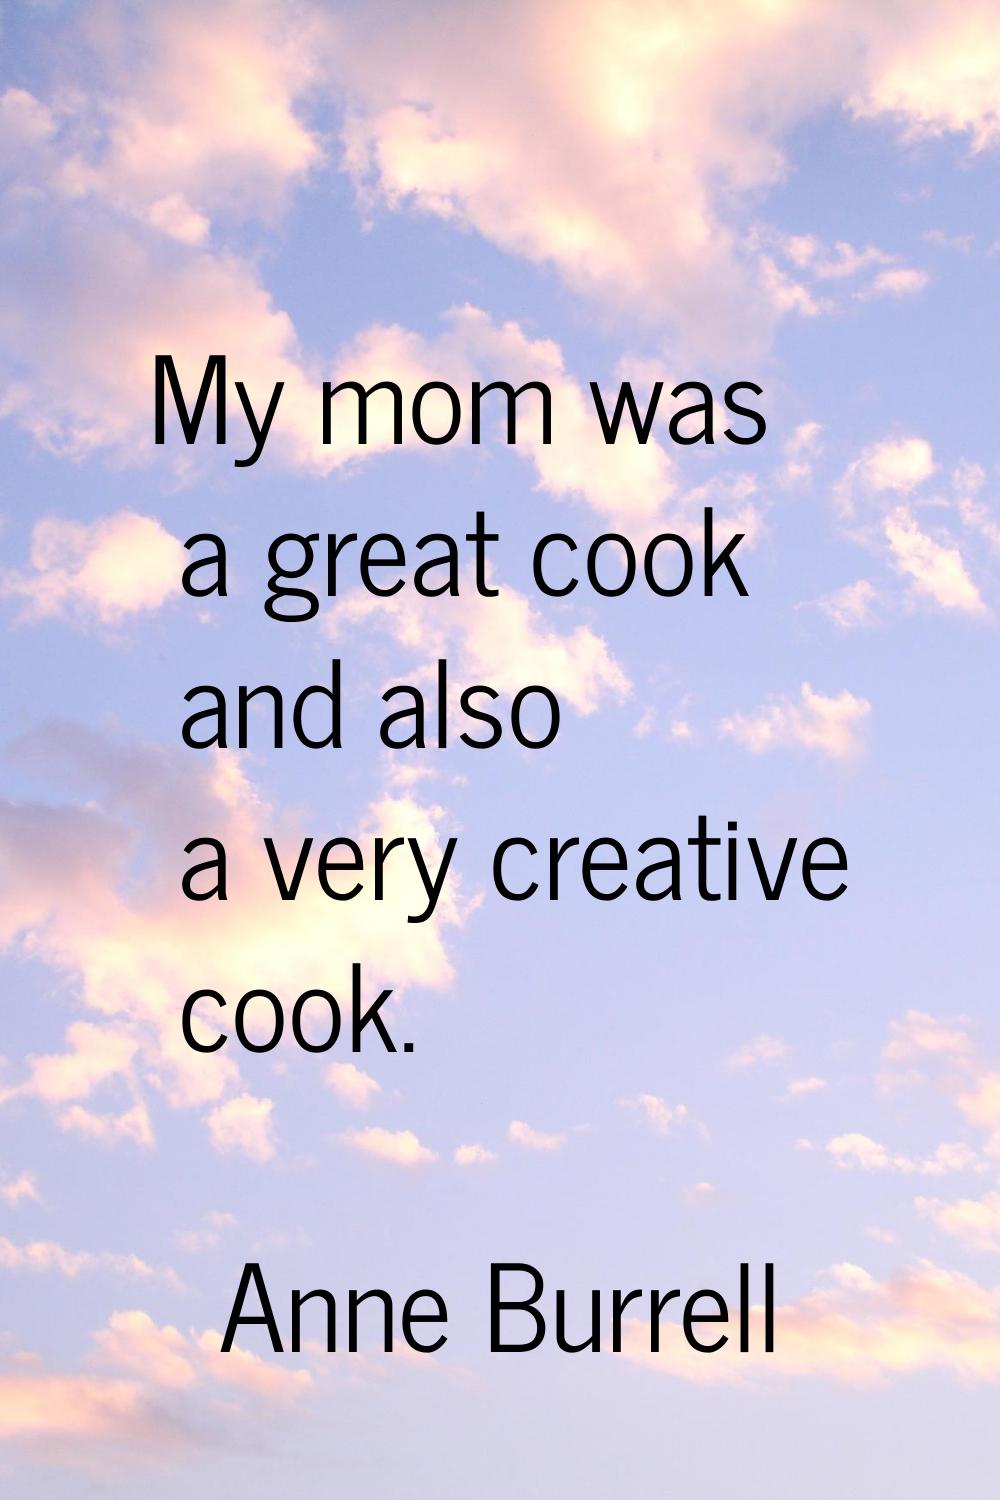 My mom was a great cook and also a very creative cook.